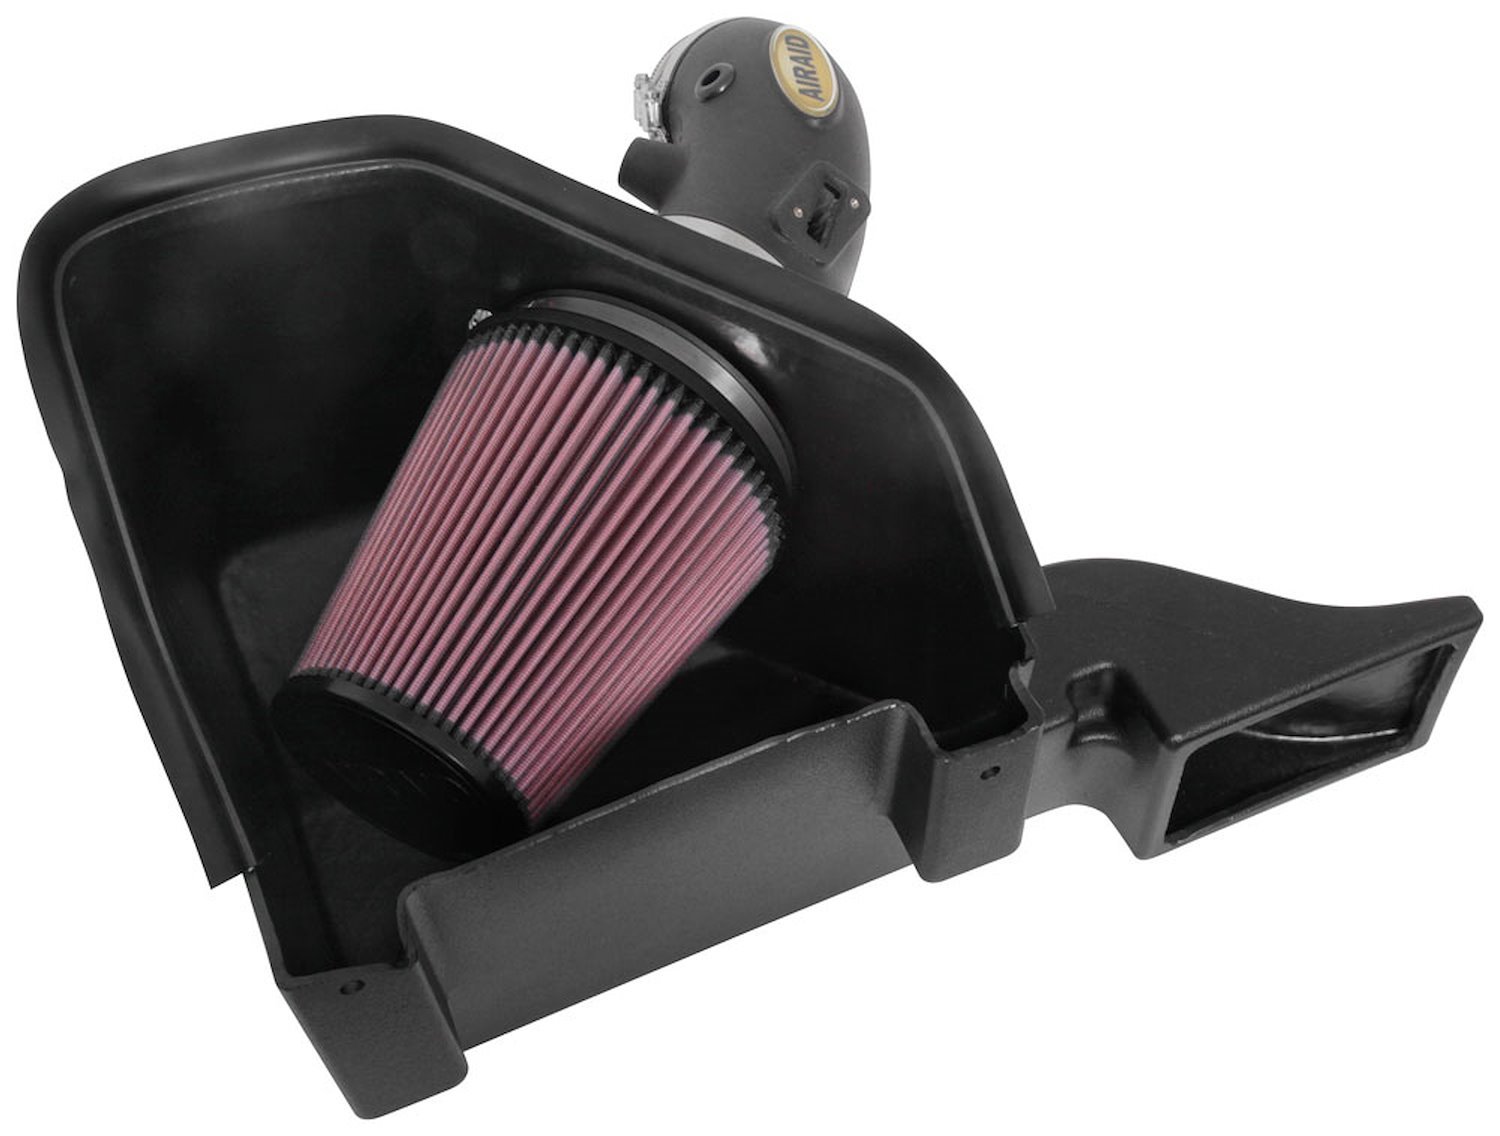 MXP Air Intake System 2014-2018 Ram 2500, 3500 6.4L V8 Fuel Injected